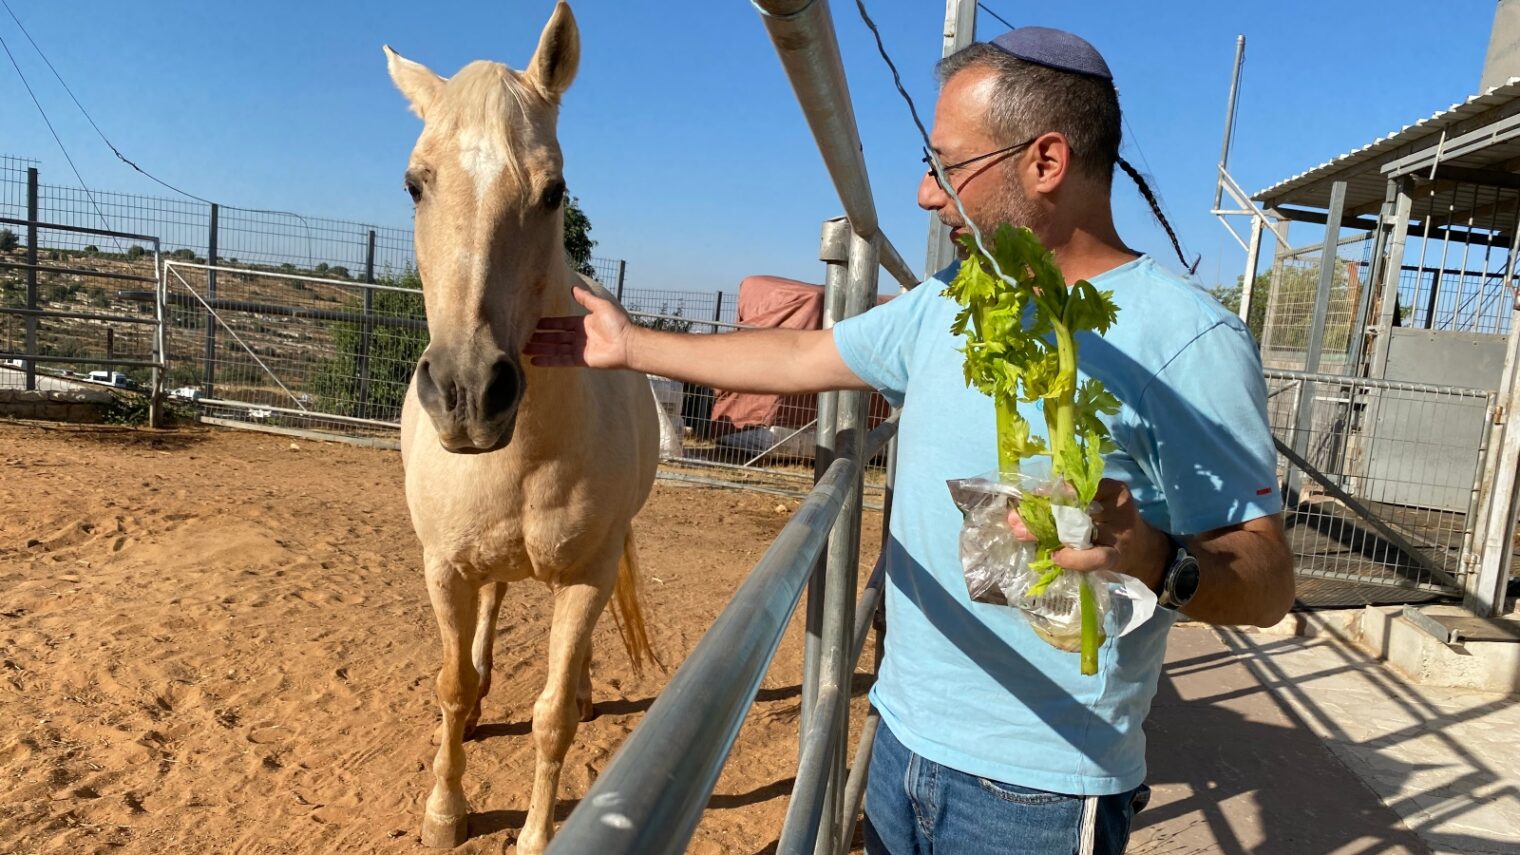 A farm where animals and people heal from trauma together - ISRAEL21c